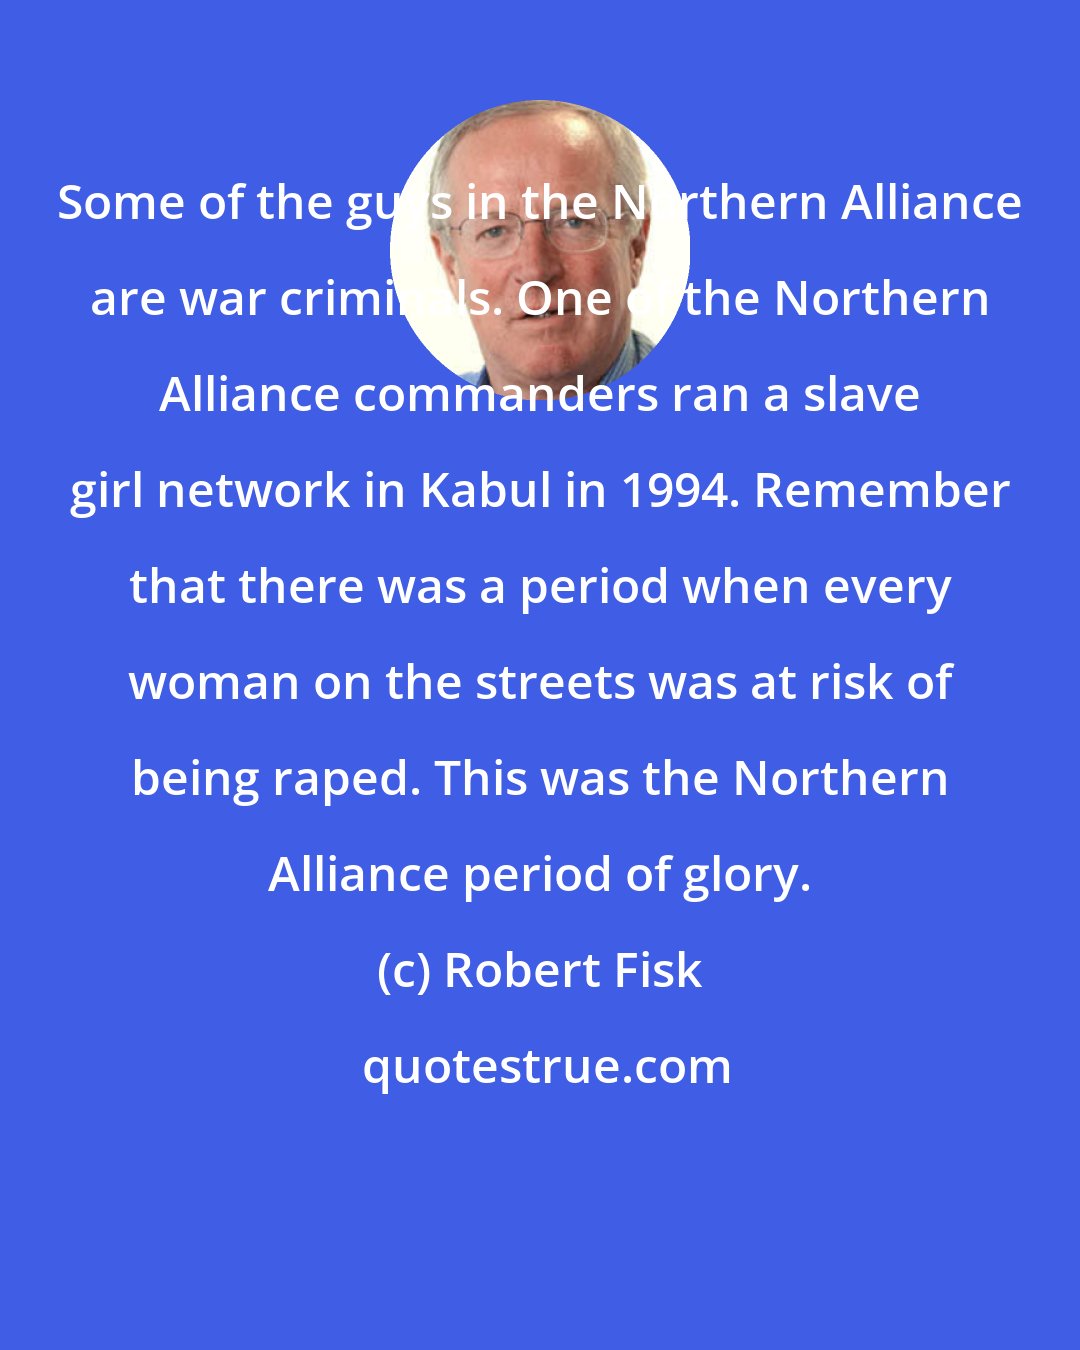 Robert Fisk: Some of the guys in the Northern Alliance are war criminals. One of the Northern Alliance commanders ran a slave girl network in Kabul in 1994. Remember that there was a period when every woman on the streets was at risk of being raped. This was the Northern Alliance period of glory.